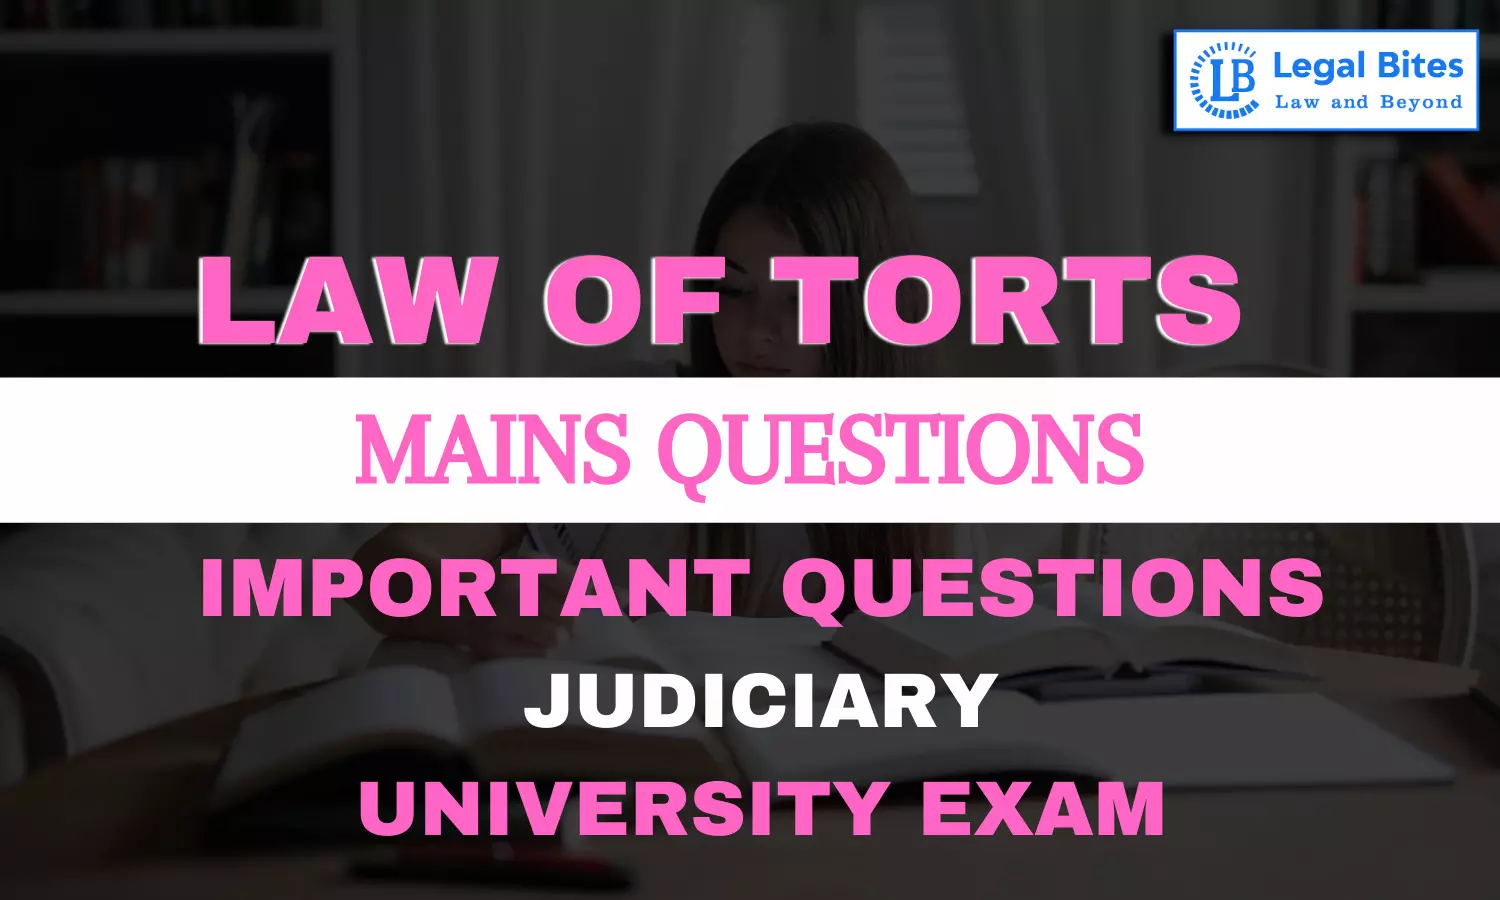 What are the essential constituents of negligence under torts?